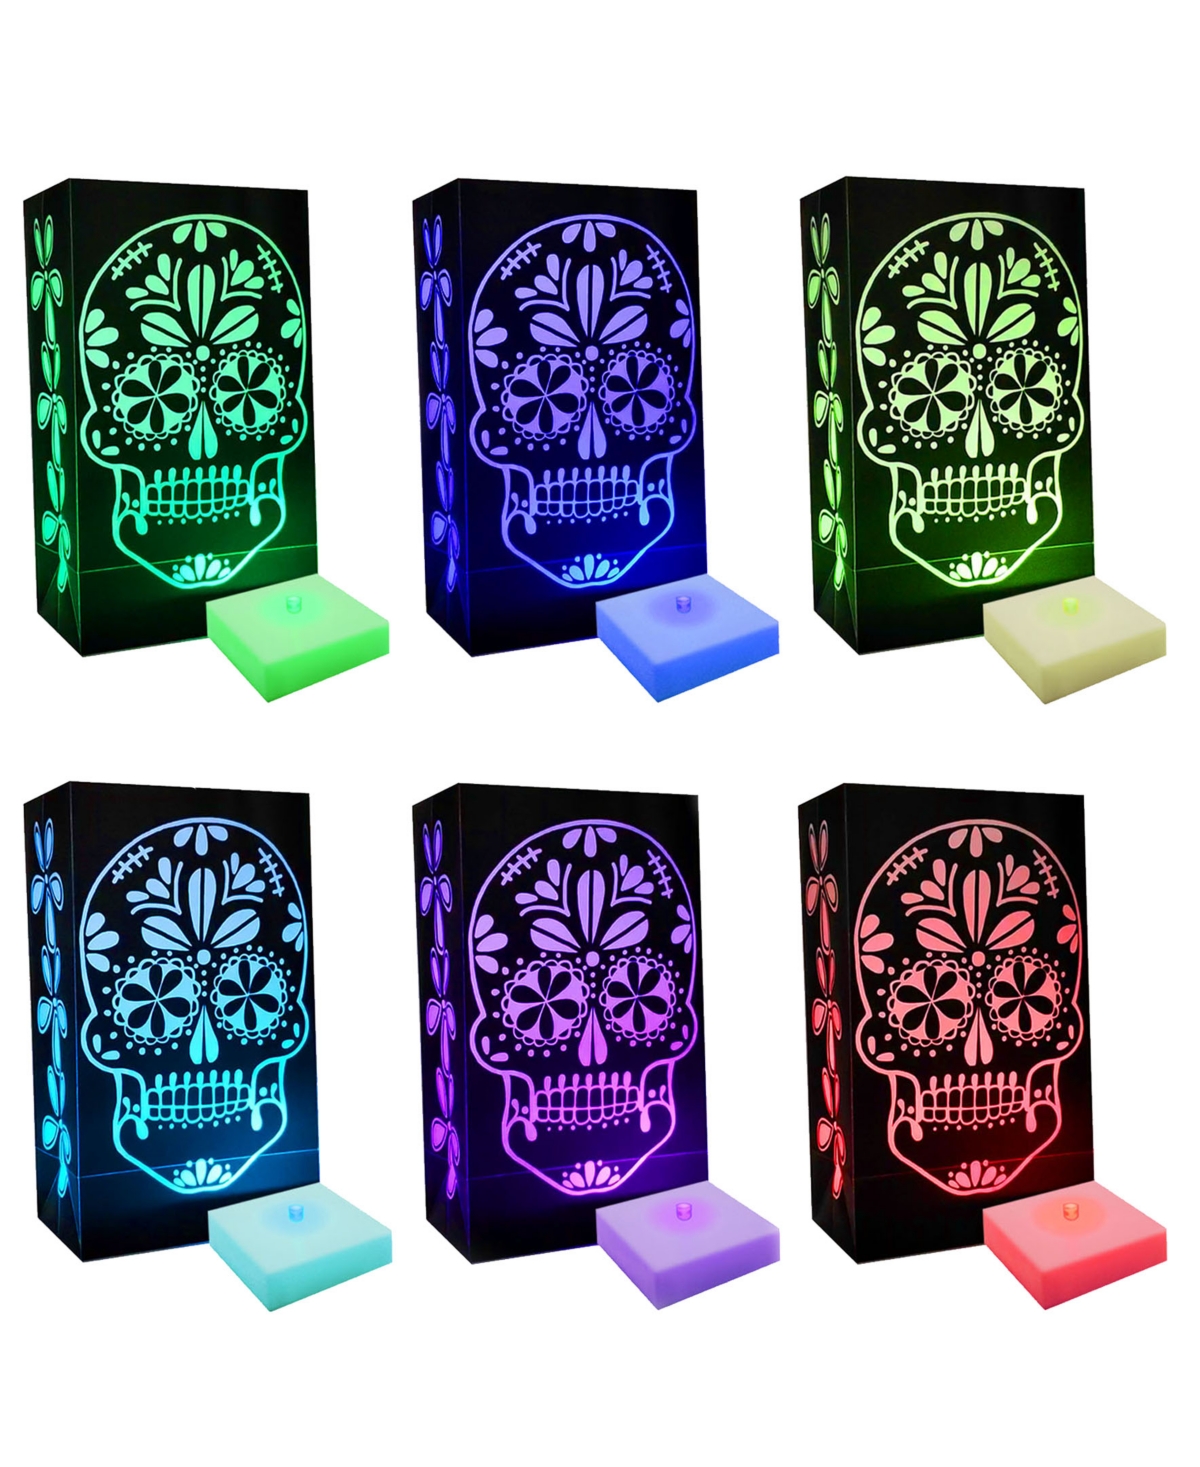 Battery Operated Led Color Changing Sugar Skull Luminaria Kit, 6 Pieces - Multicolor